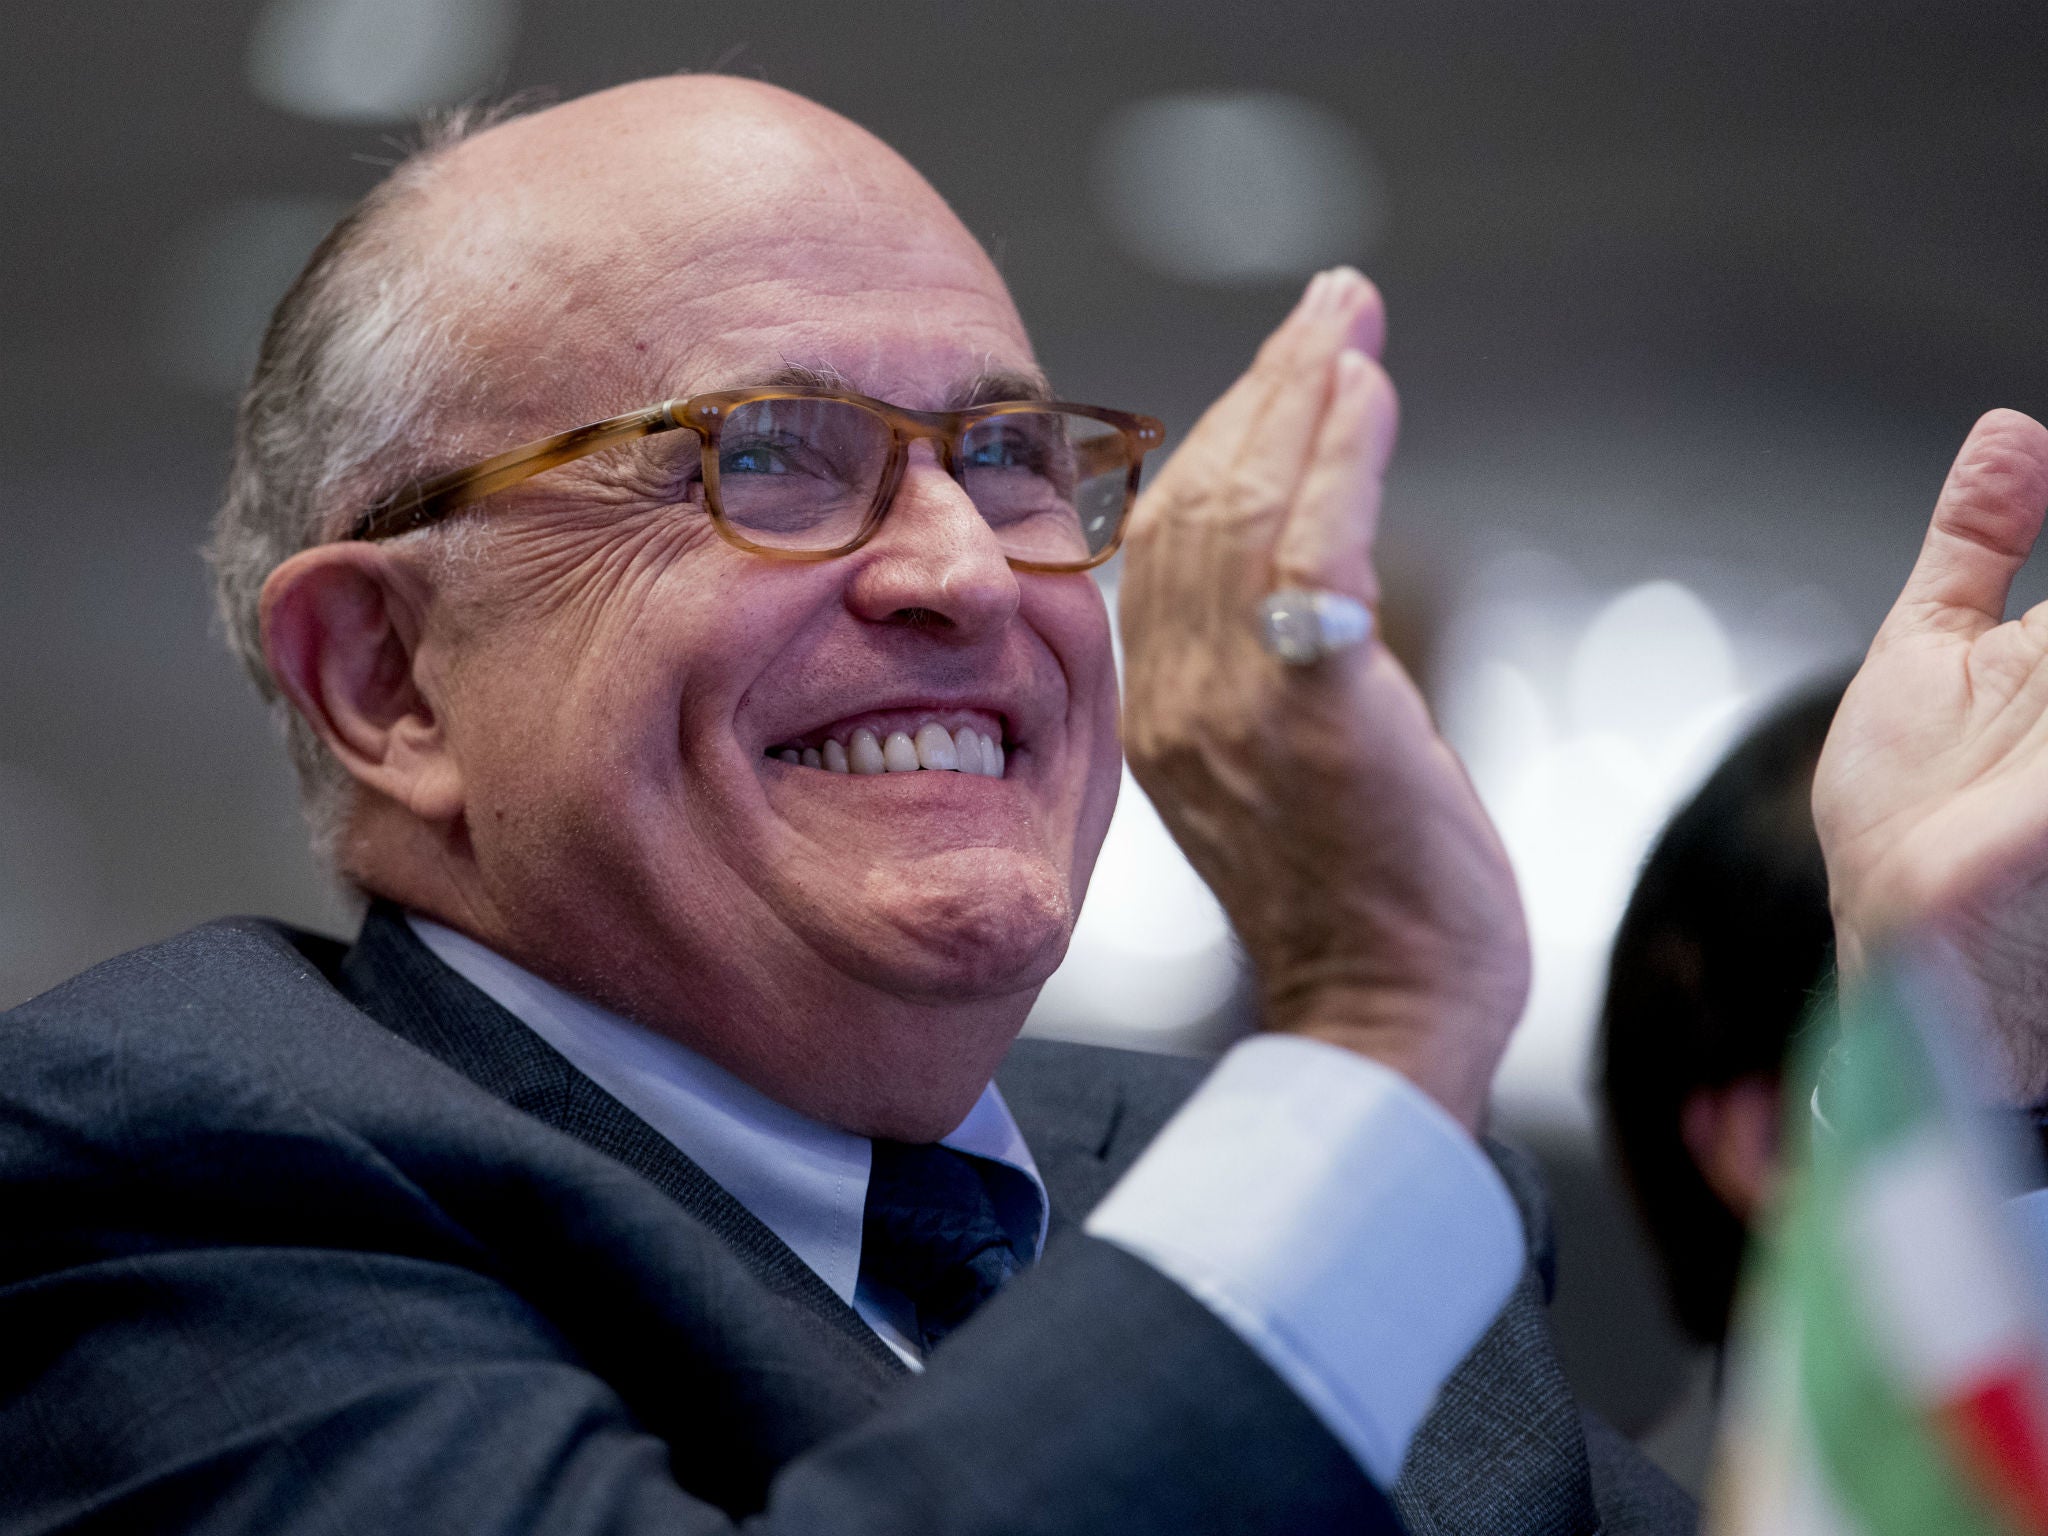 Rudy Giuliani applauds at the Iran Freedom Convention for Human Rights and democracy at the Grand Hyatt in Washington